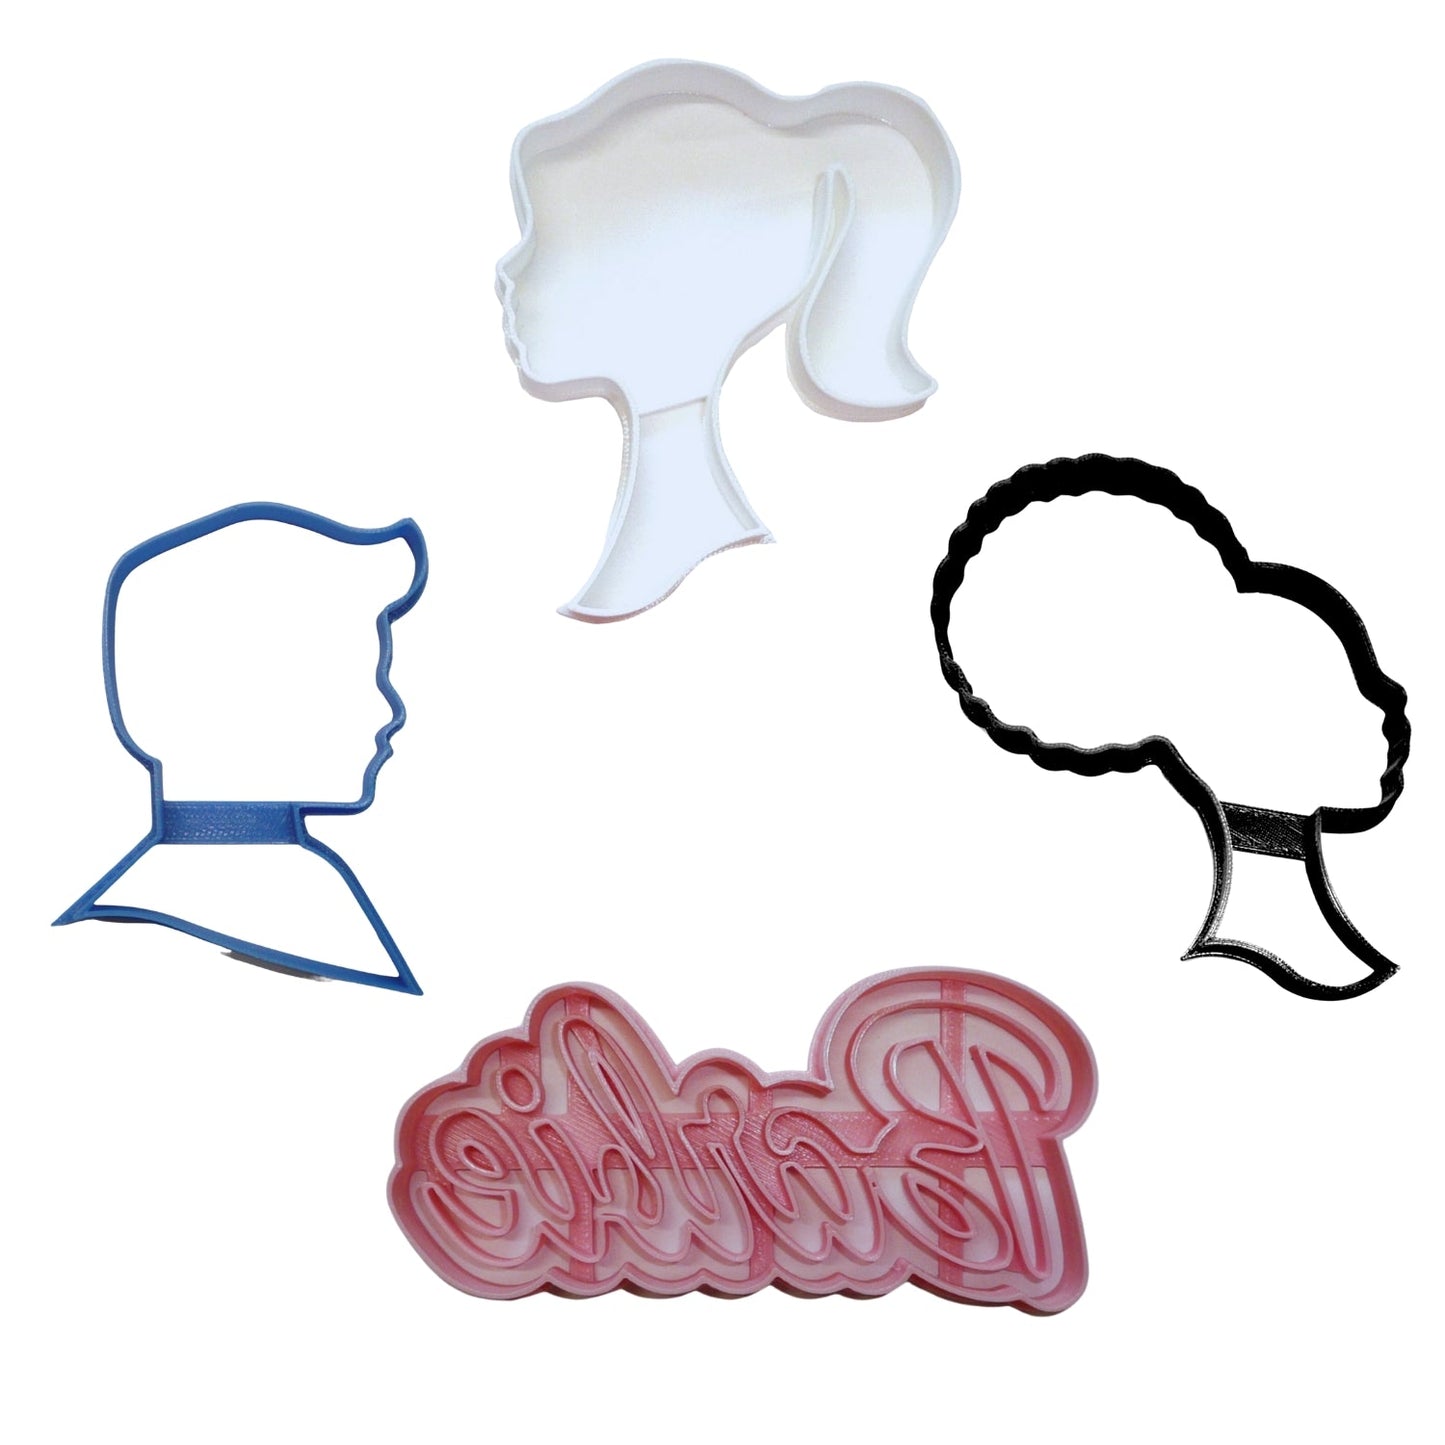 Barbie Movie Theme Characters Set Of 4 Cookie Cutters Made In USA PR1831